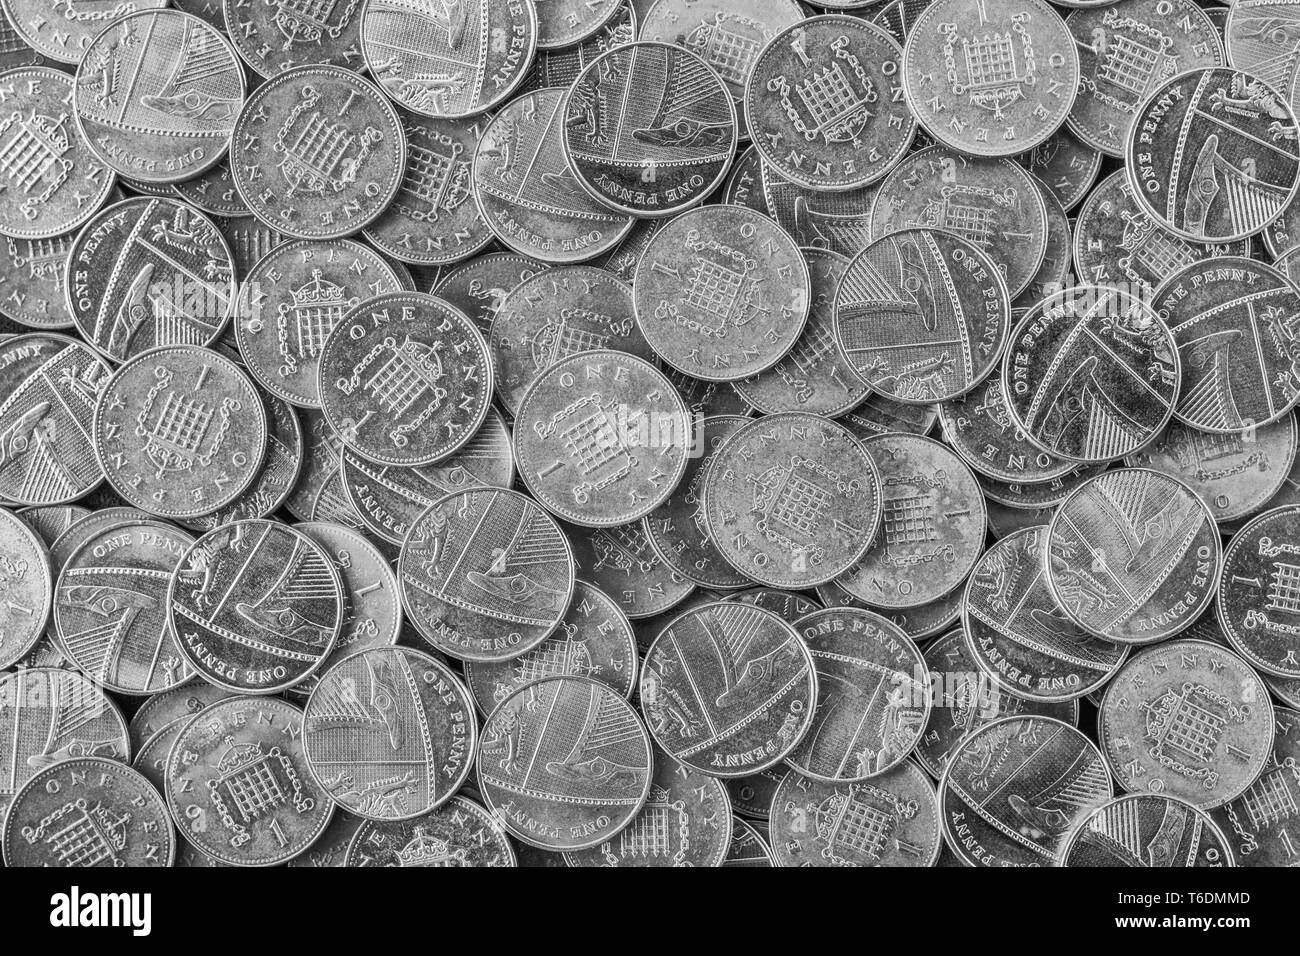 Massed 1 Penny / 1p coins. Death of the penny, end of copper coins, penny withdrawal from circulation, Save the Penny. B&W version of T6DMM. Stock Photo